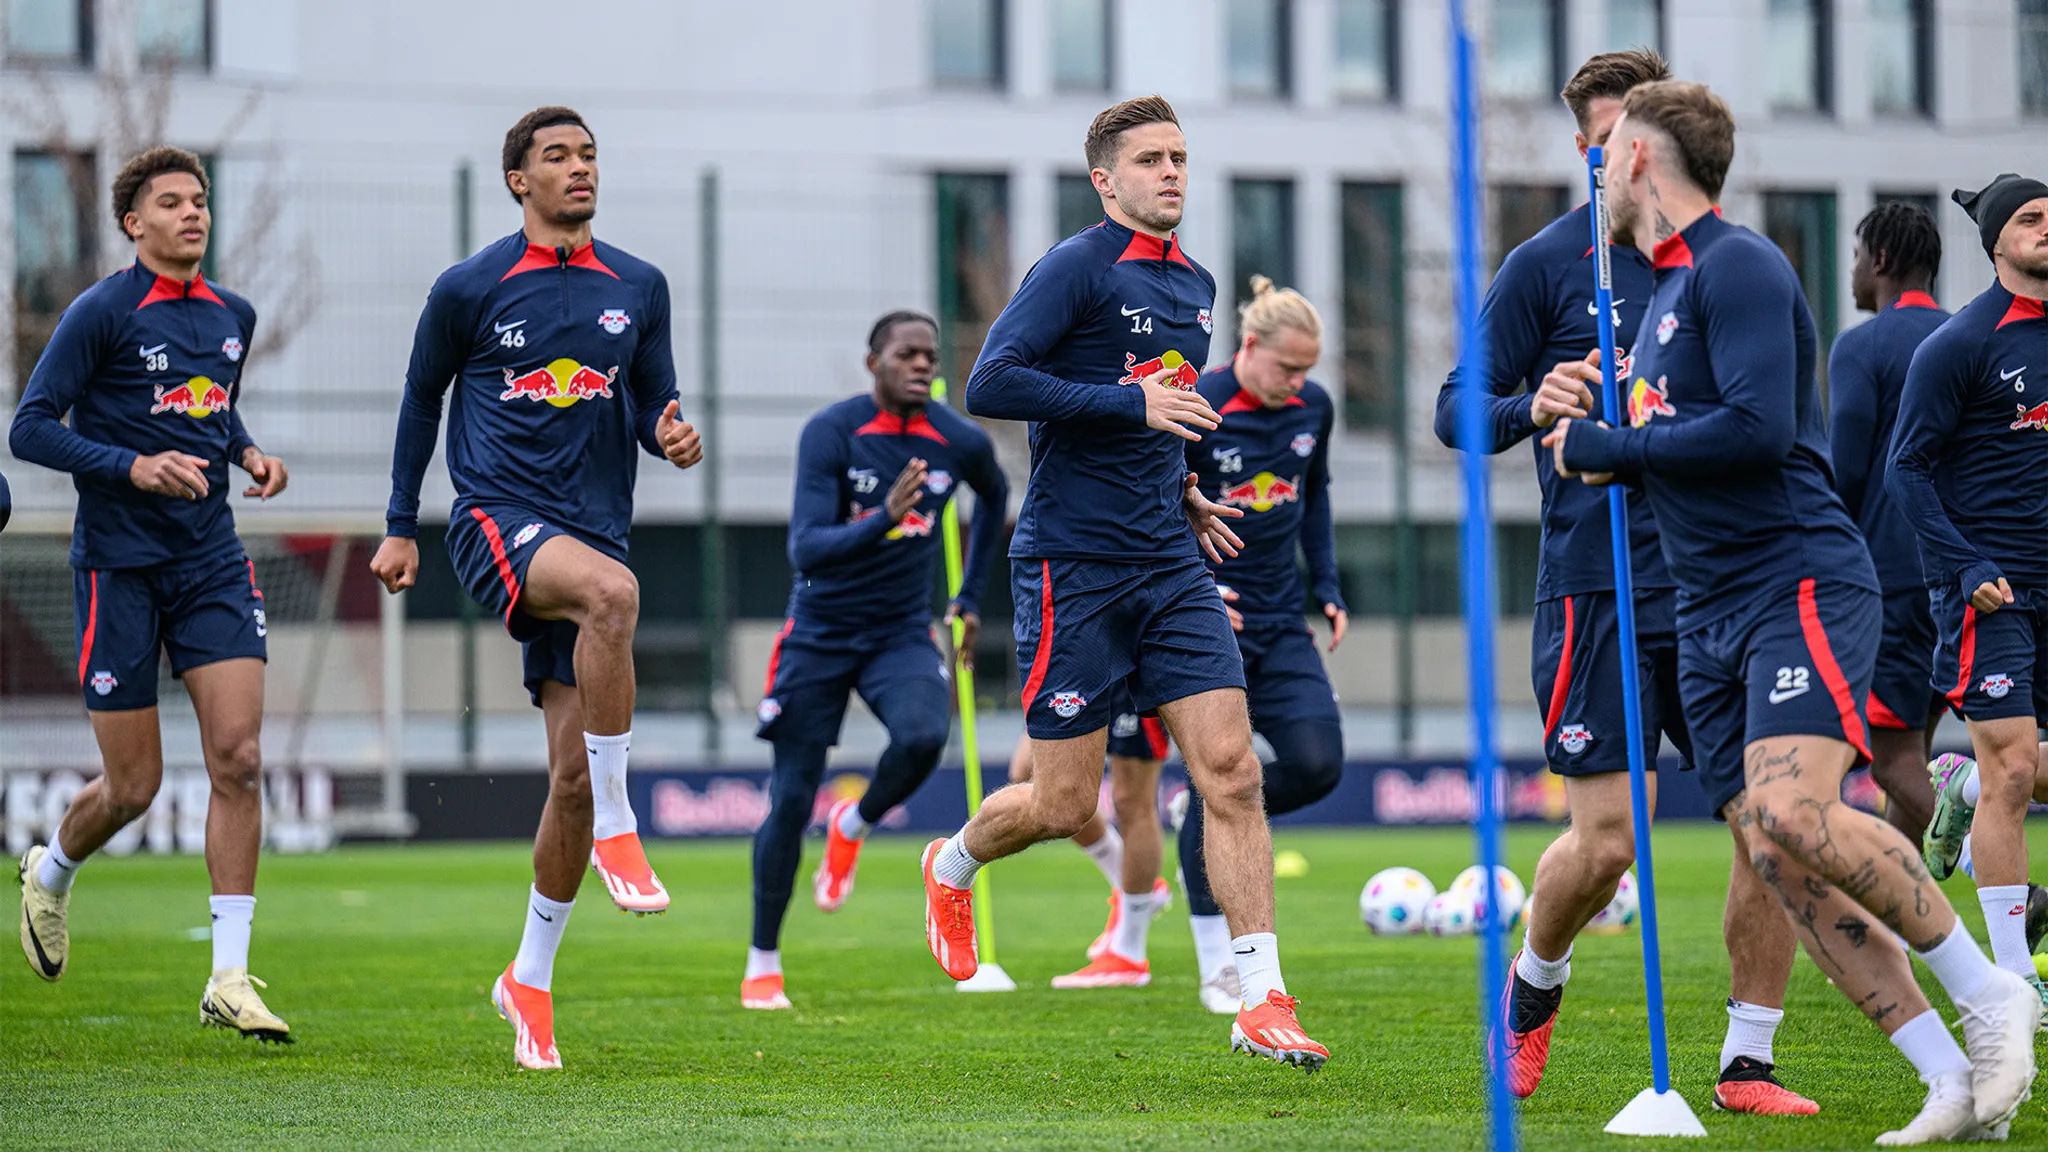 RB Leipzig during the open training session at Cottaweg.